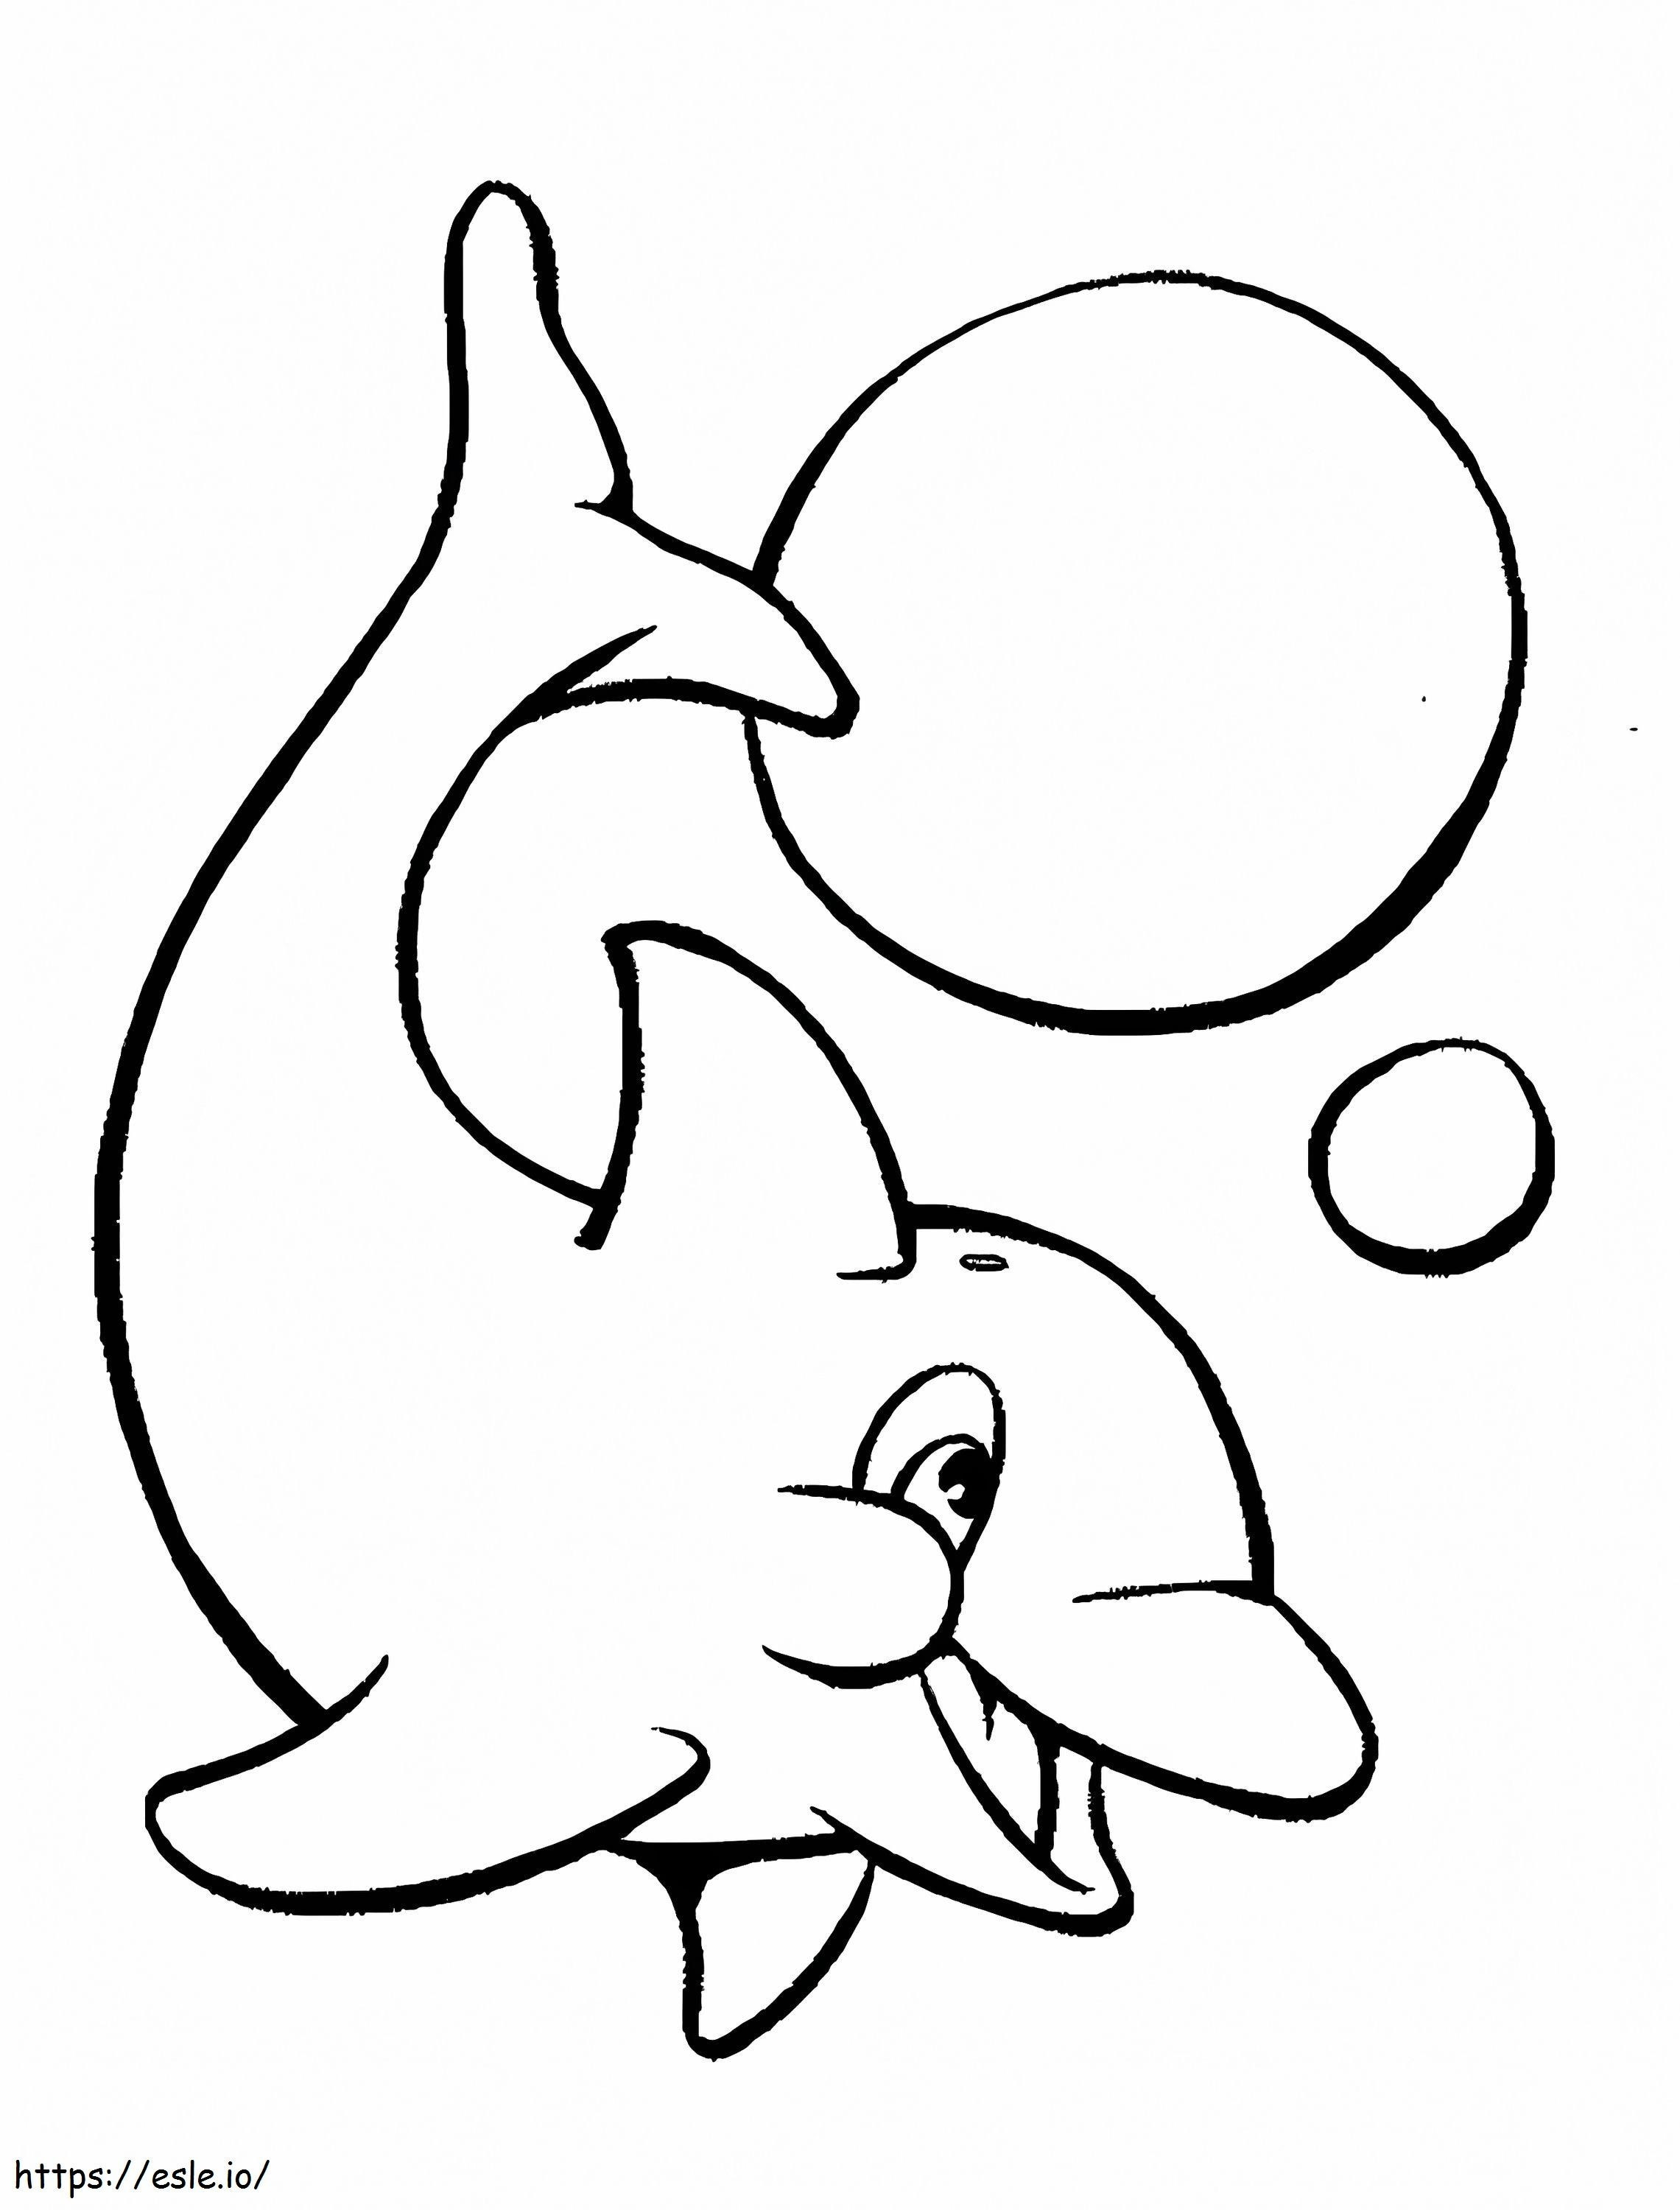 Dolphin Printable coloring page